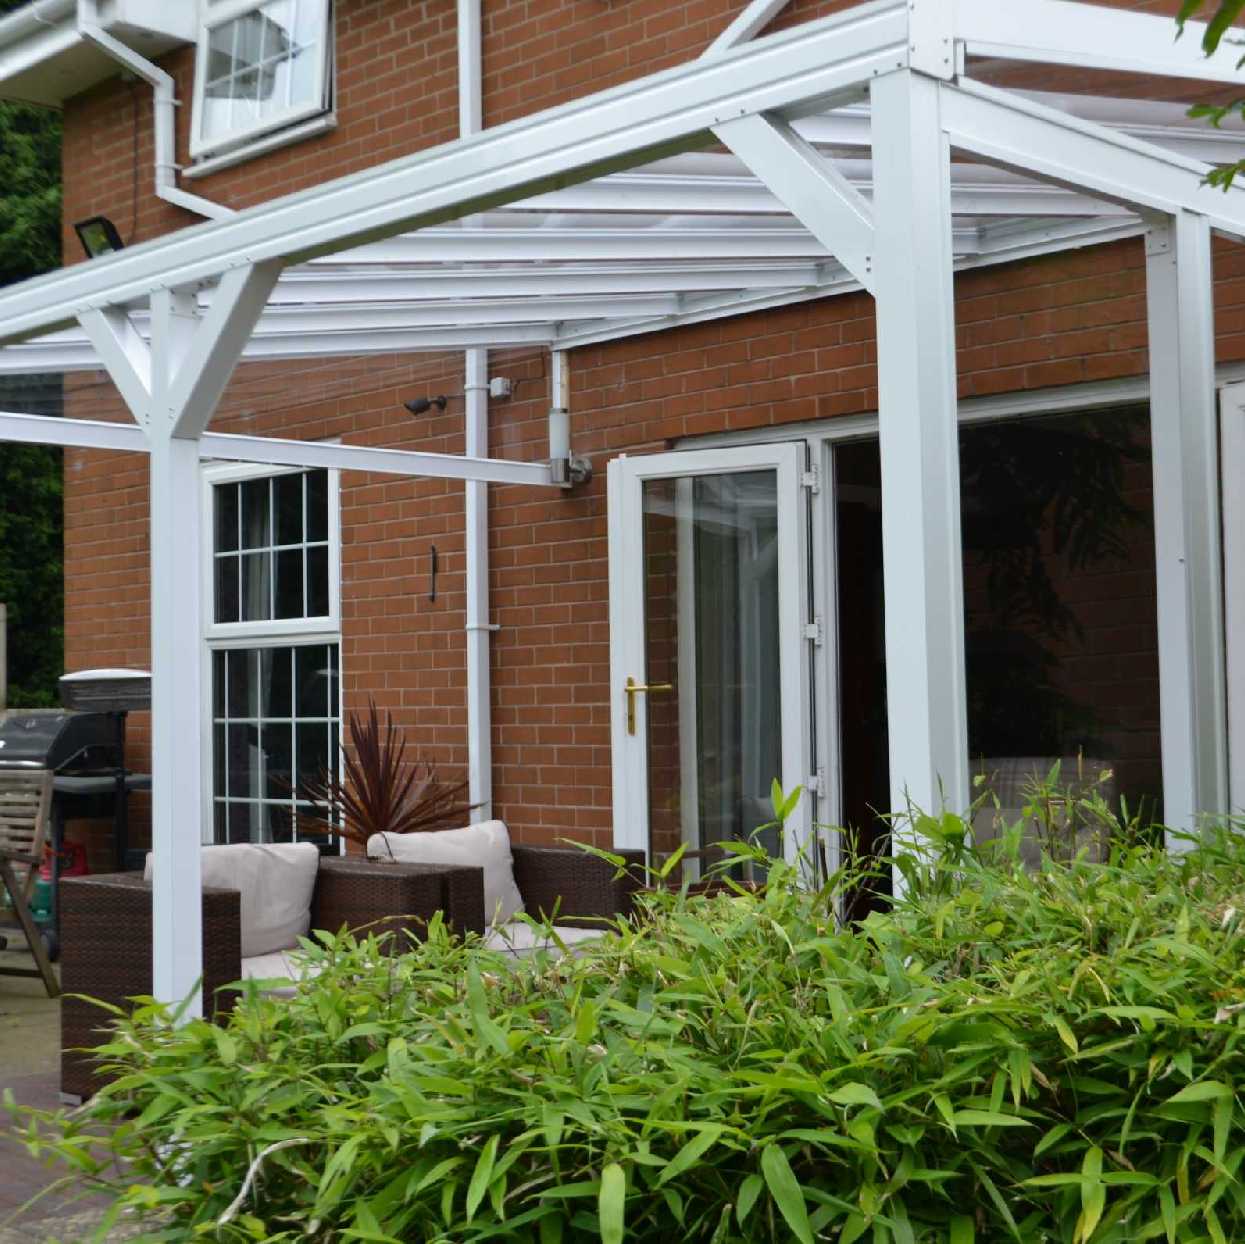 Omega Smart Lean-To Canopy, White with 6mm Glass Clear Plate Polycarbonate Glazing - 4.2m (W) x 3.0m (P), (3) Supporting Posts from Omega Build